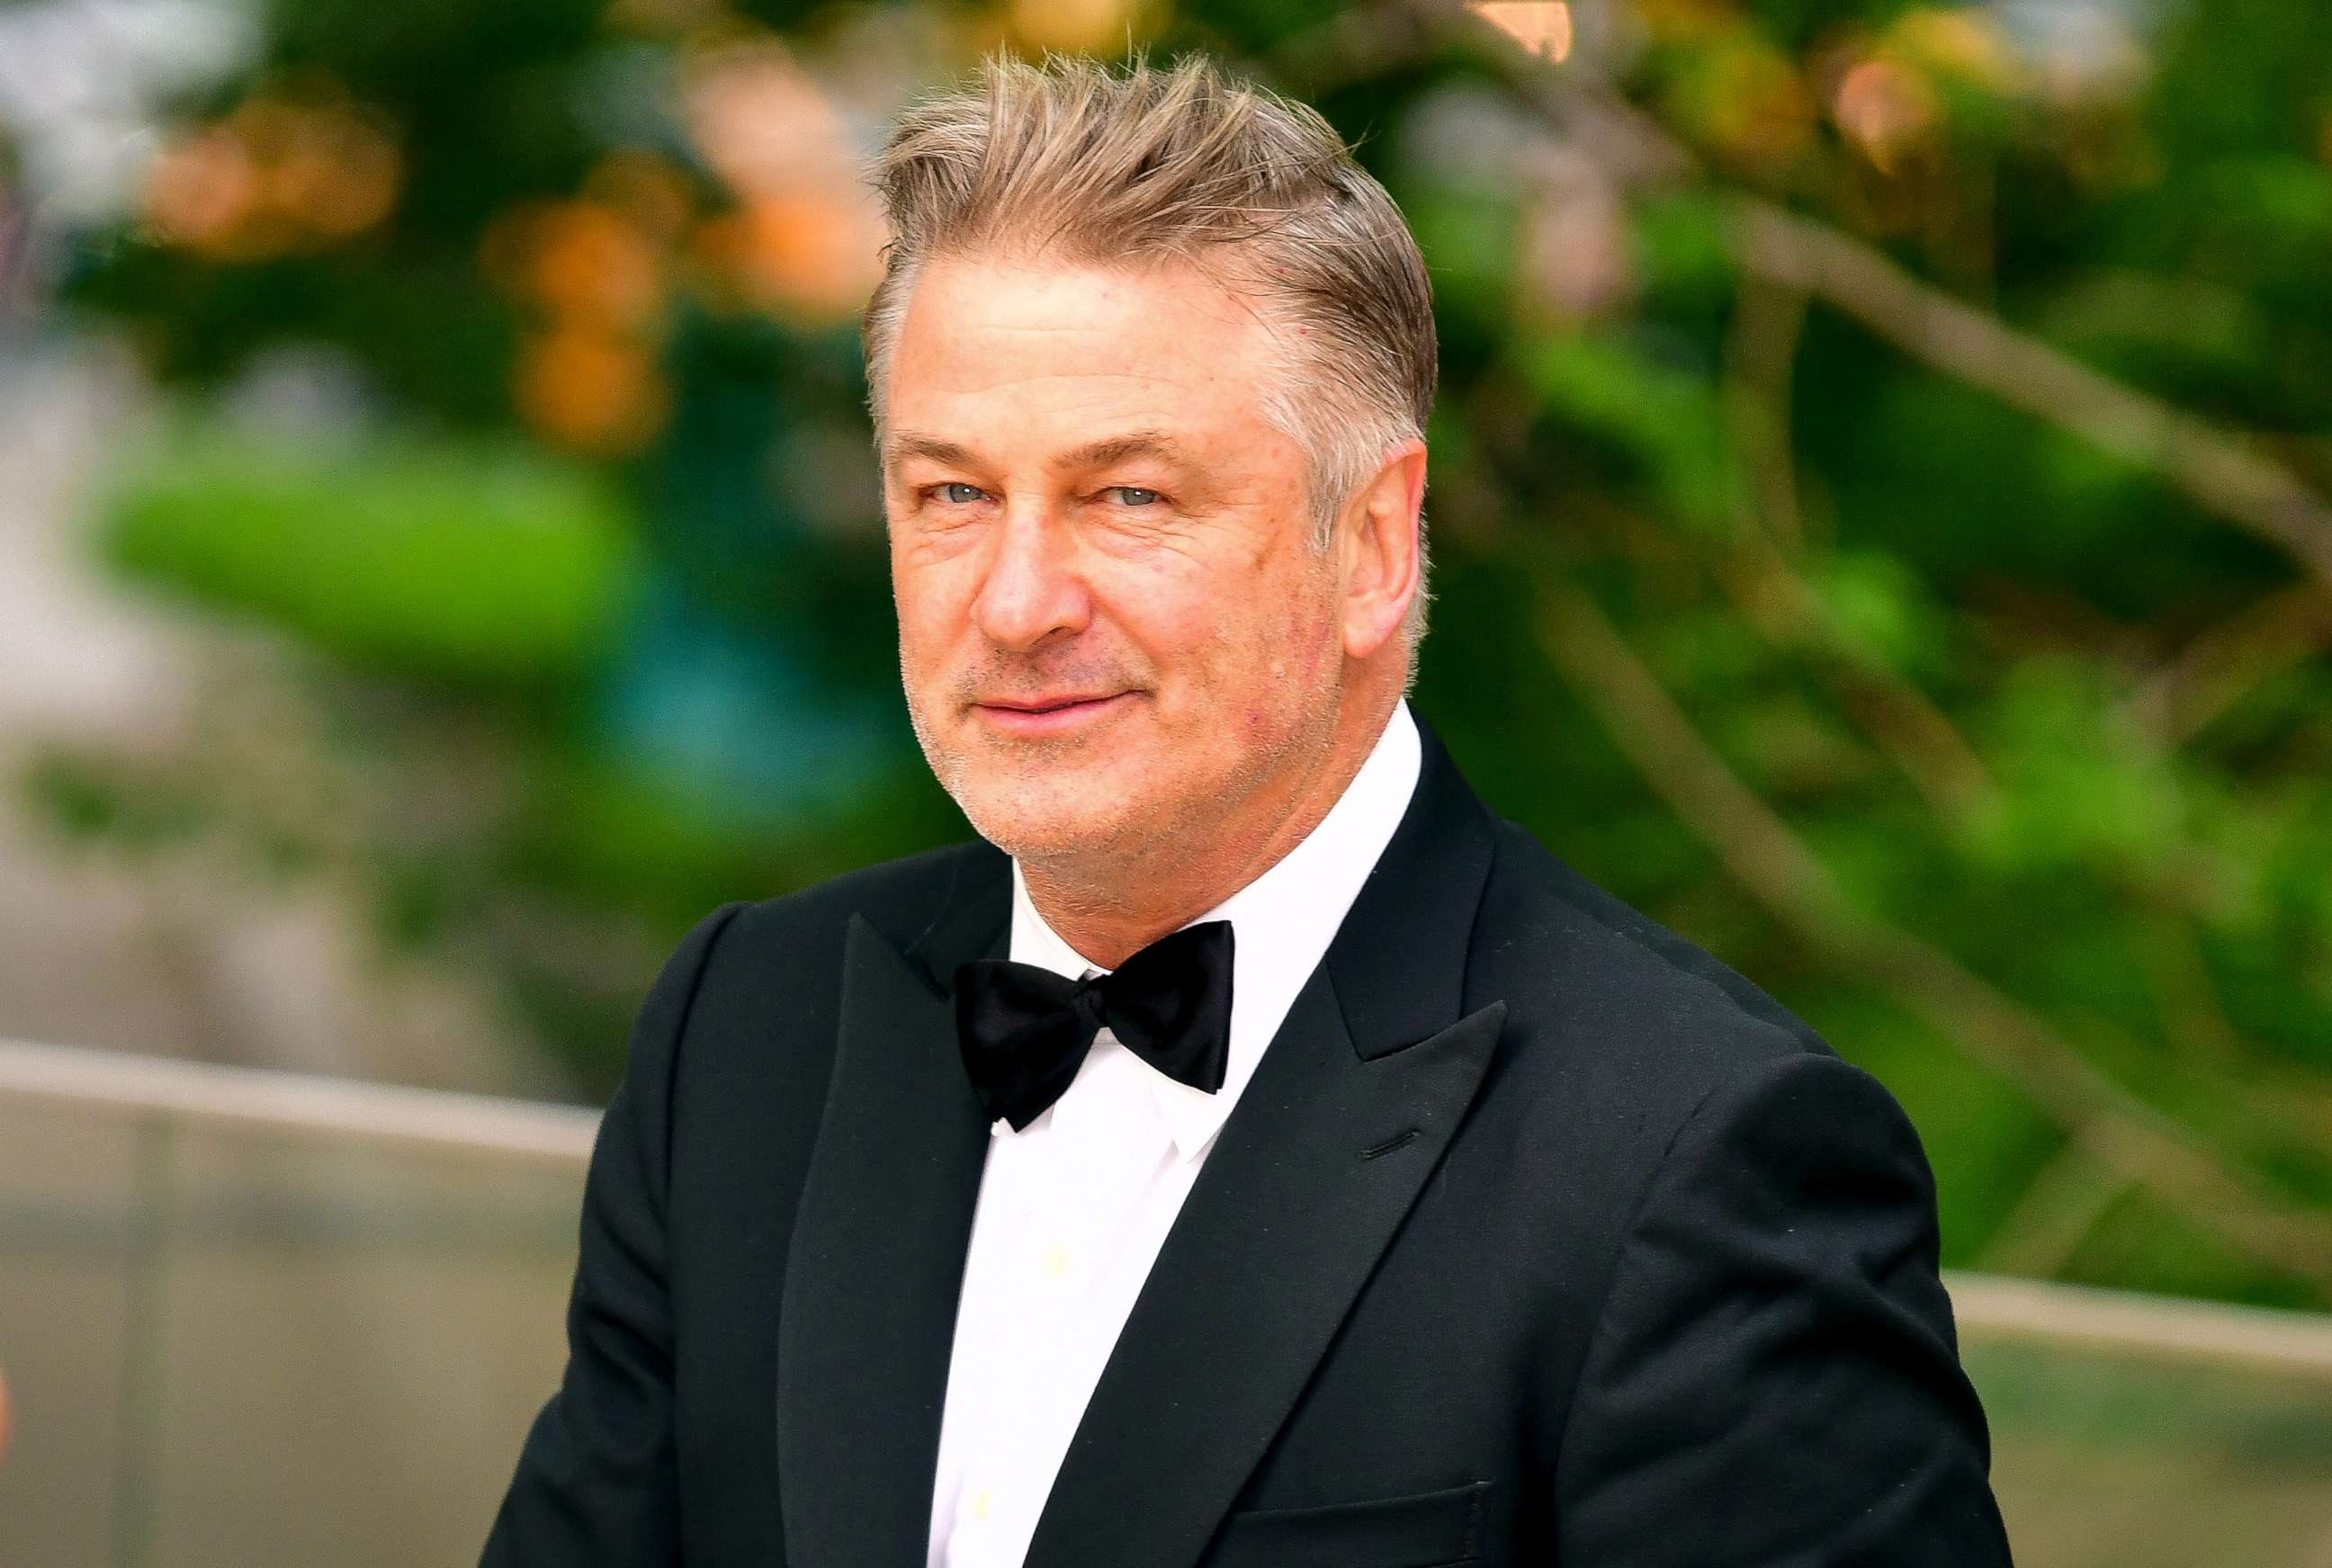 PHOTO: Alec Baldwin arrives to the American Ballet Theatre 2019 Spring Gala at The Metropolitan Opera House, May 20, 2019, in New York City.